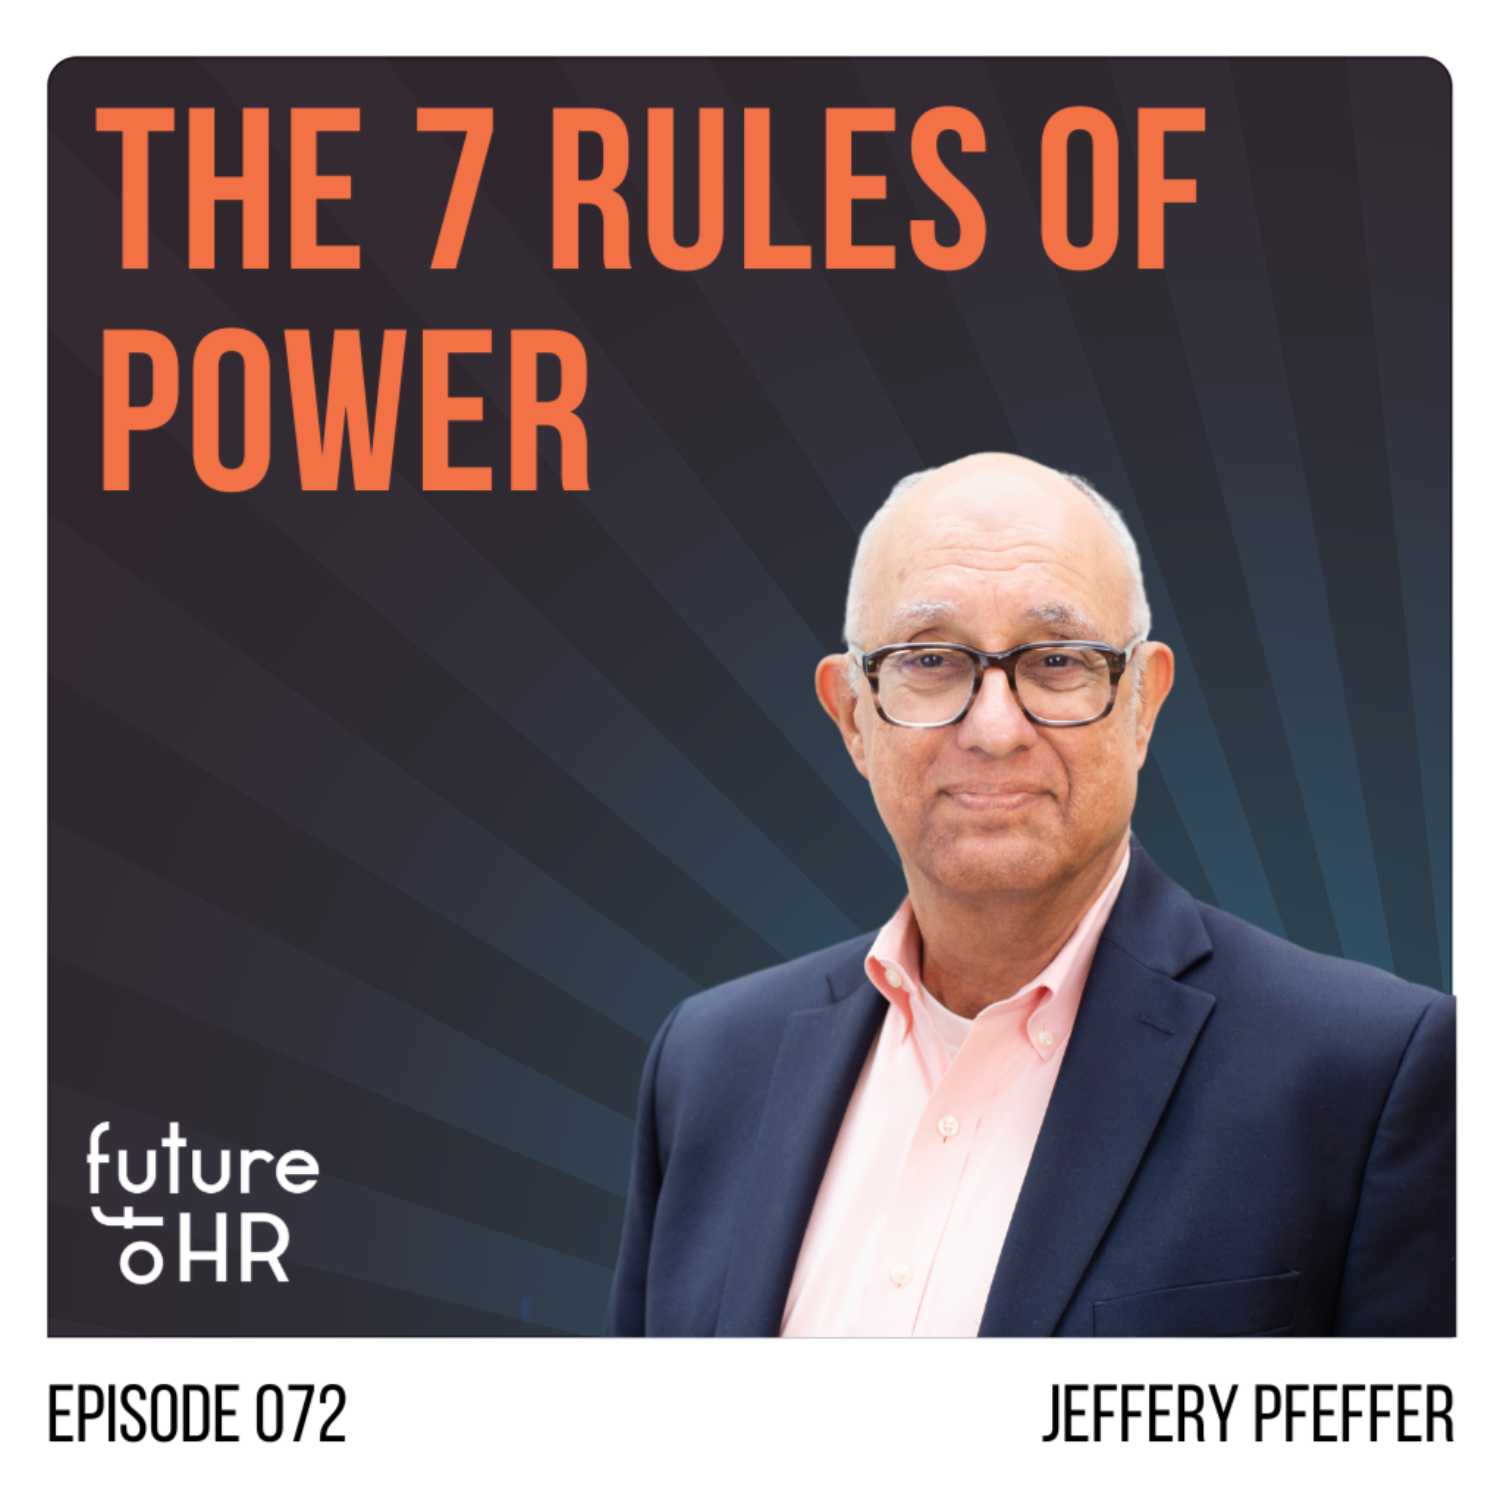 “The 7 Rules of Power” with Jeffrey Pfeffer, Professor Stanford University and Author of 16 books including the “7 Rules of Power: Surprising But True Advice on How to Get Things Done and Advance Your Career”